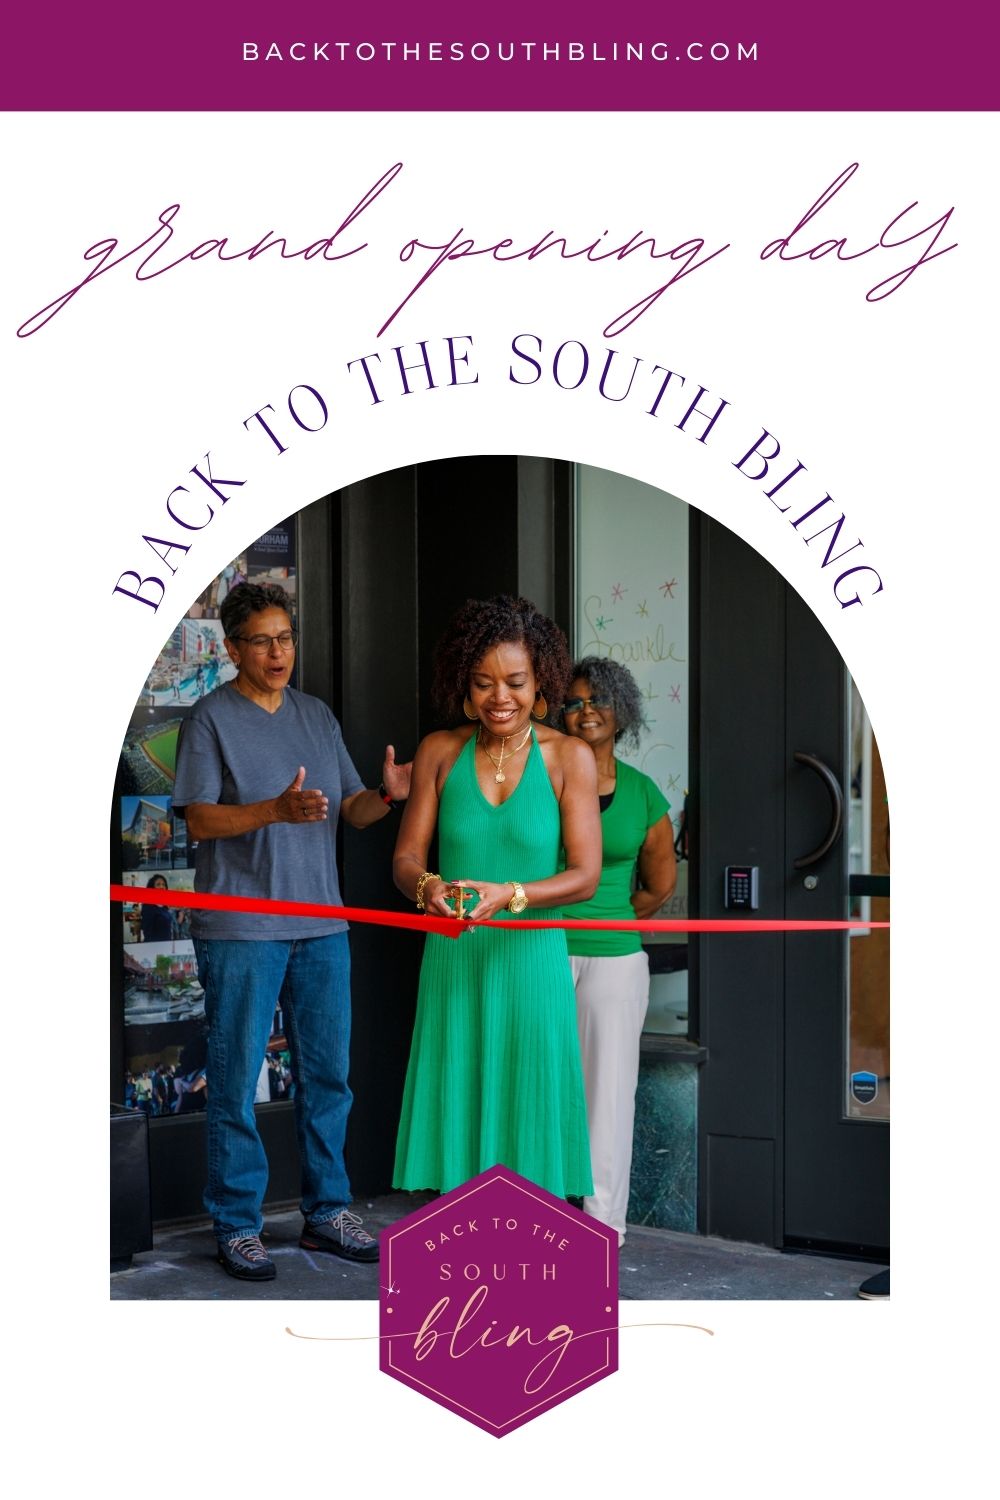 Back to the South Bling Pop Up Shop Grand Opening